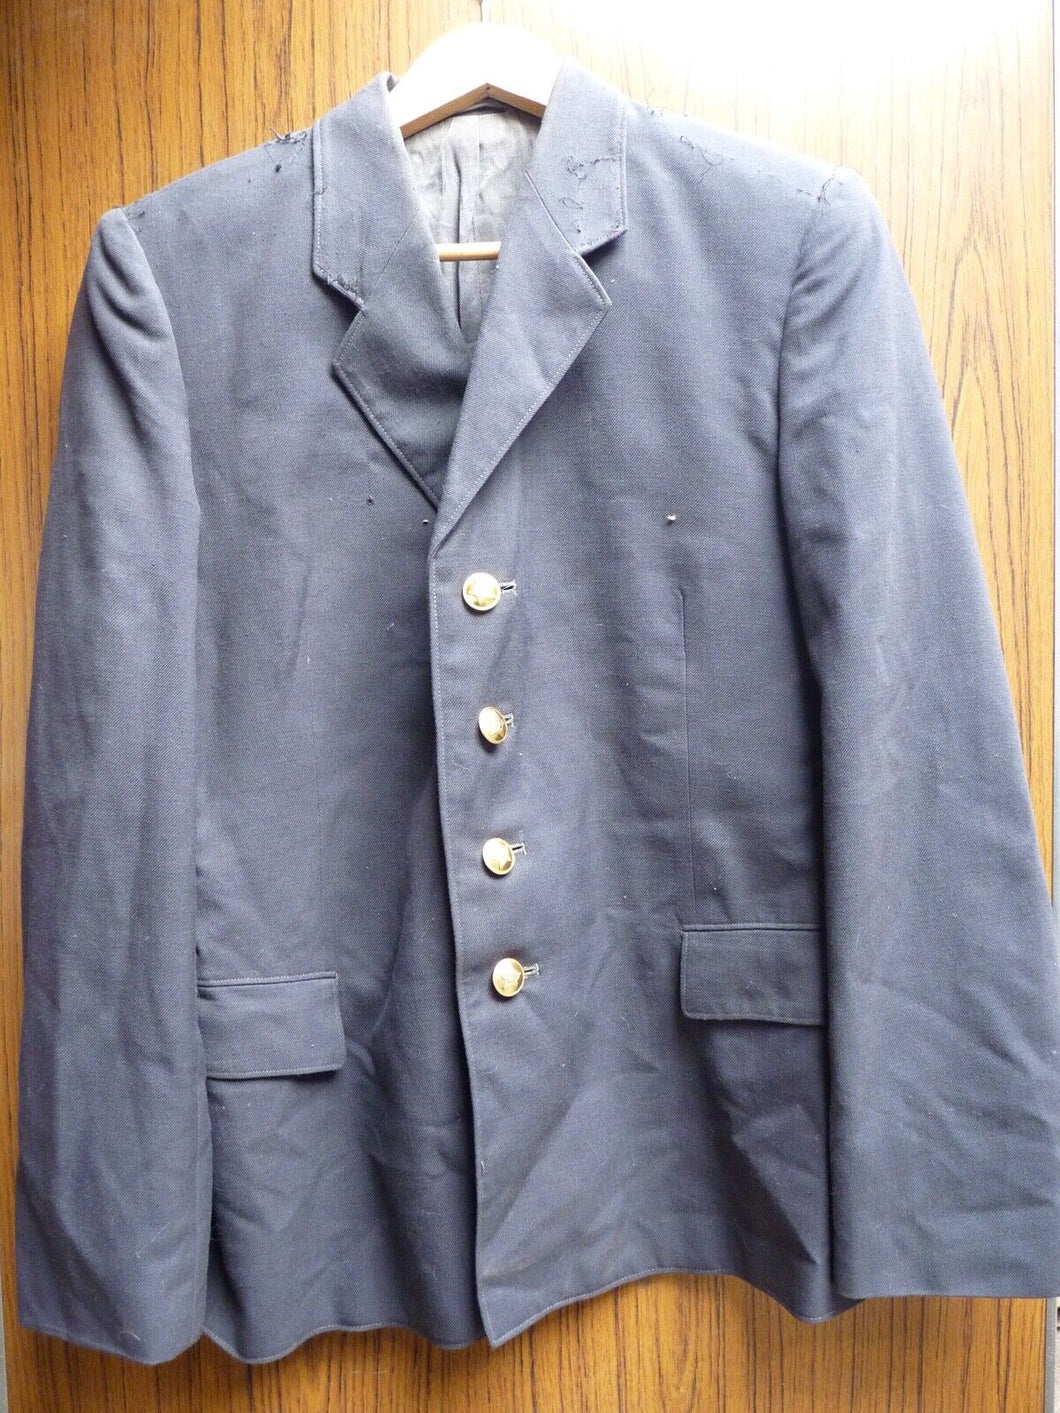 Genuine Cold War Era Russian Army Officer Dress Jacket 40 Inch Chest